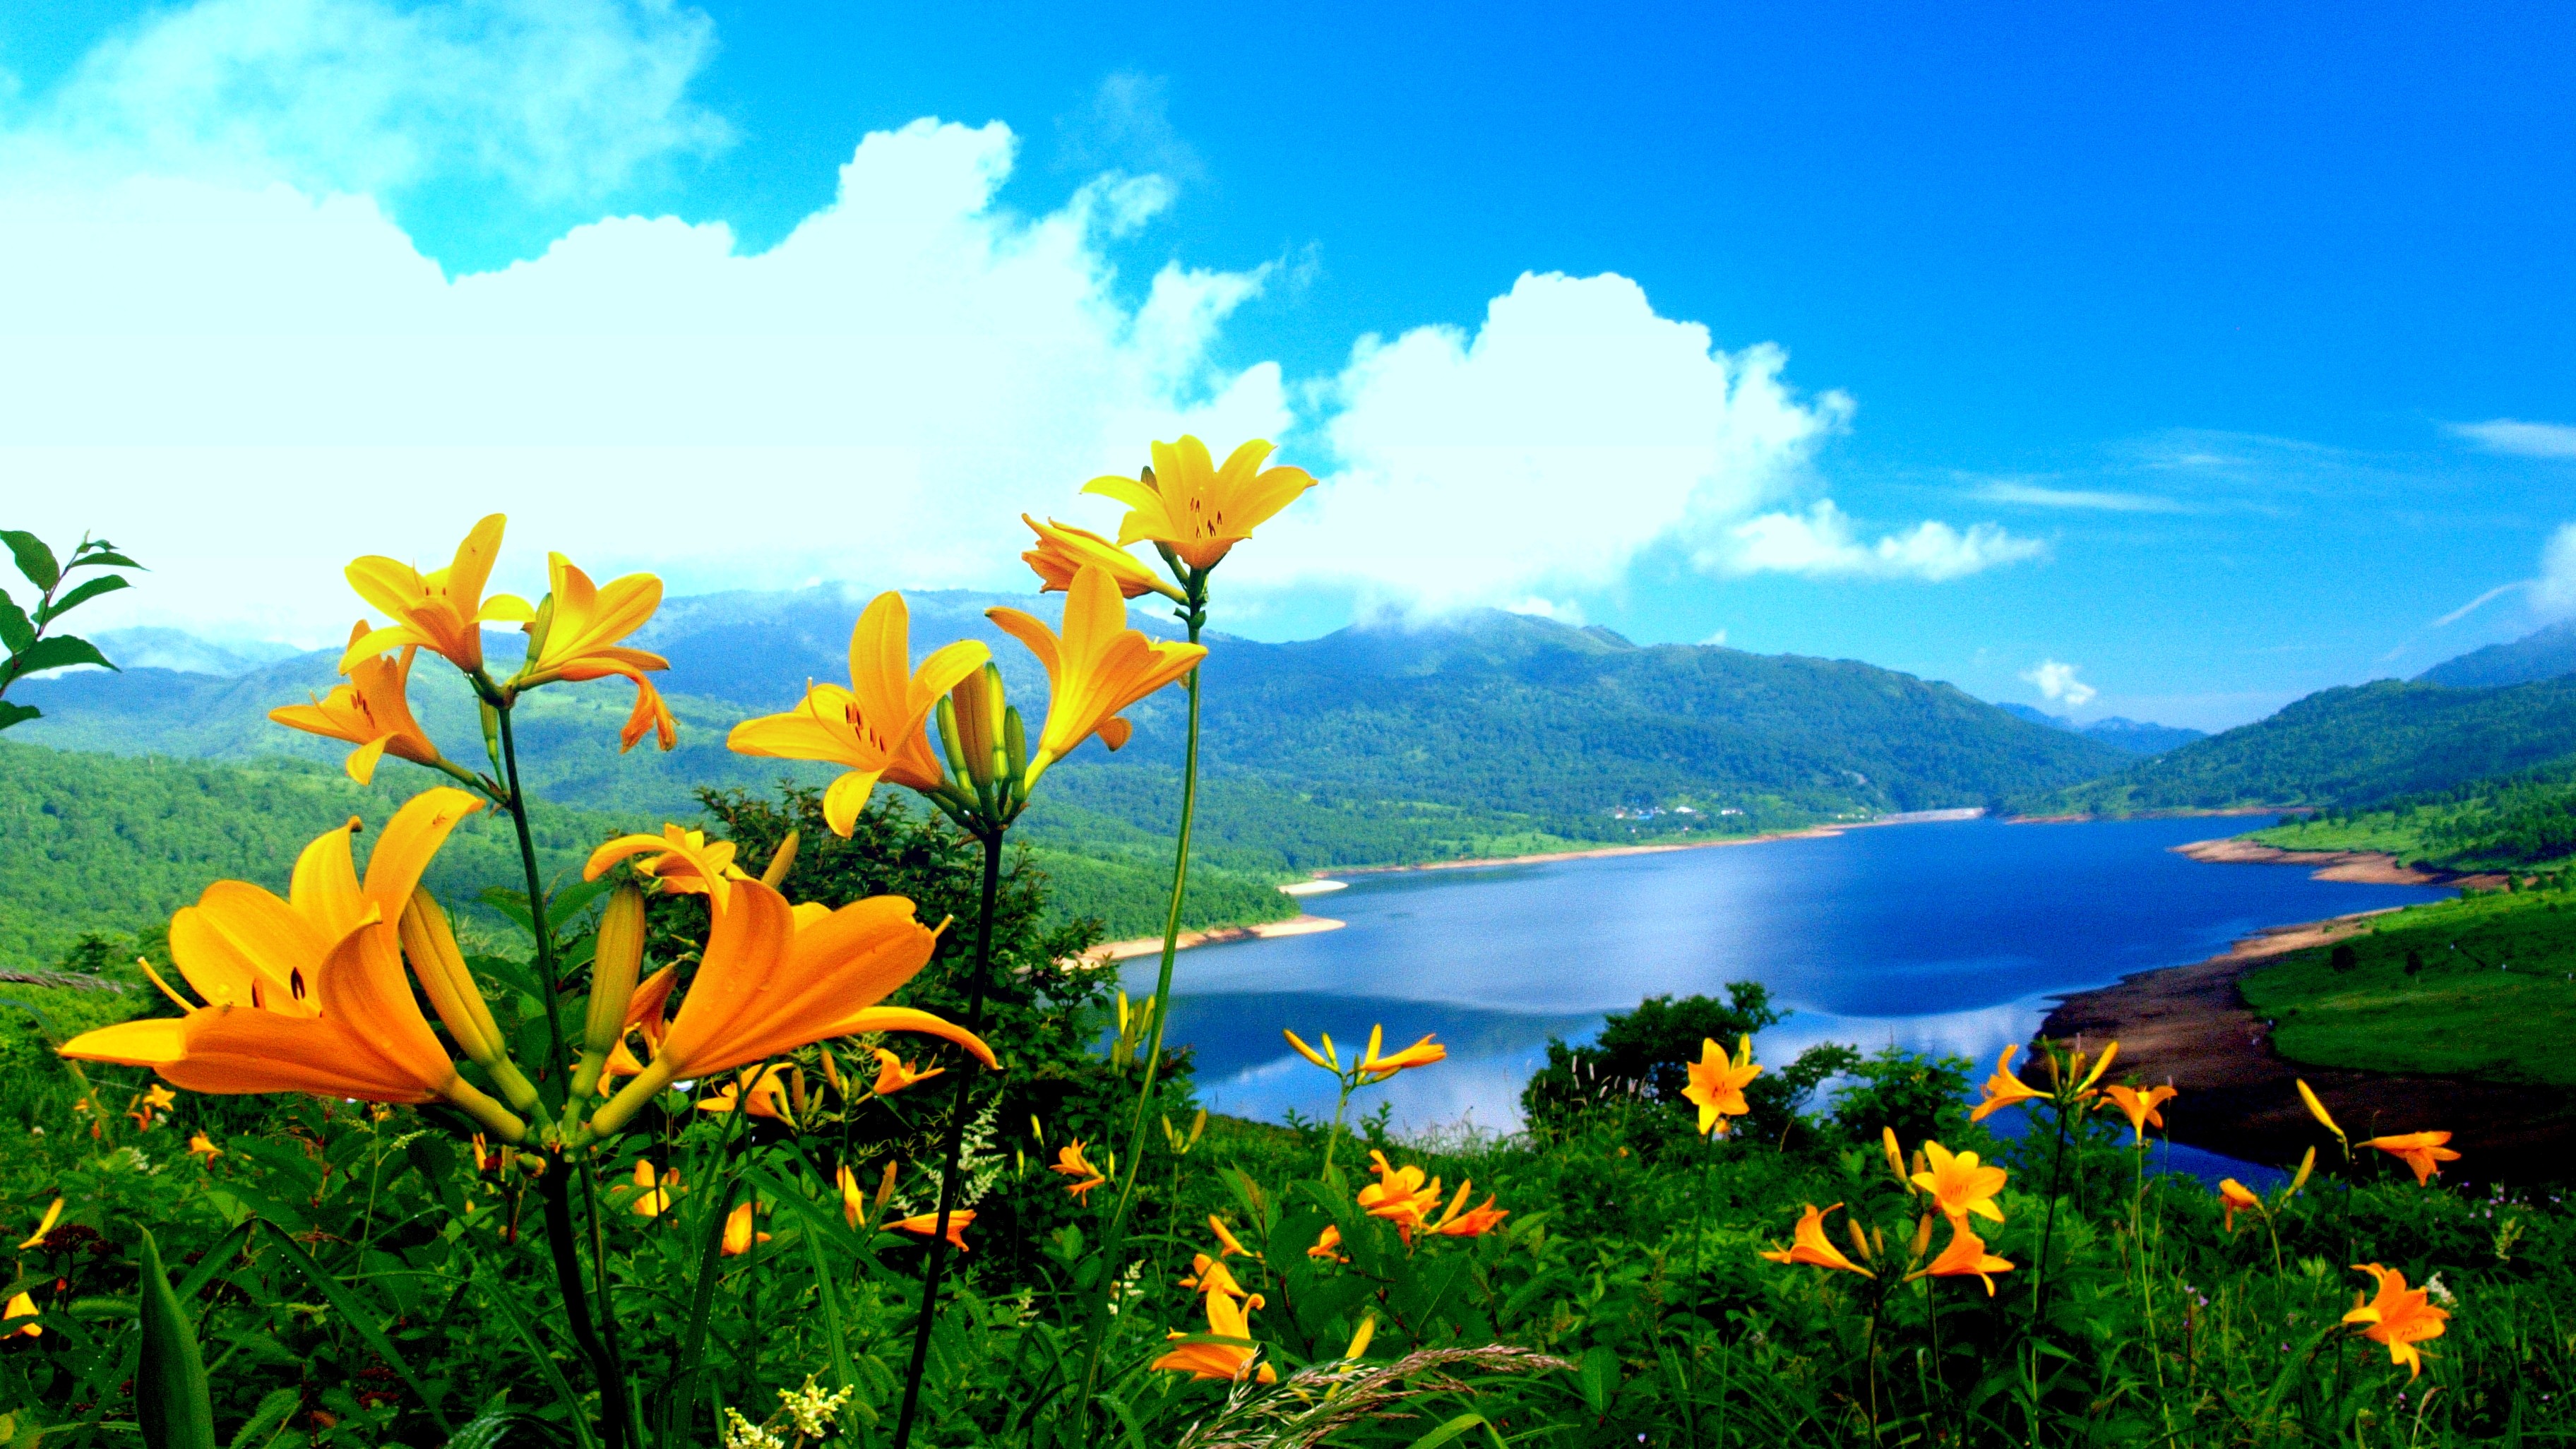 11 Awesome And Beautiful Nature Wallpapers To Download - Awesome 11